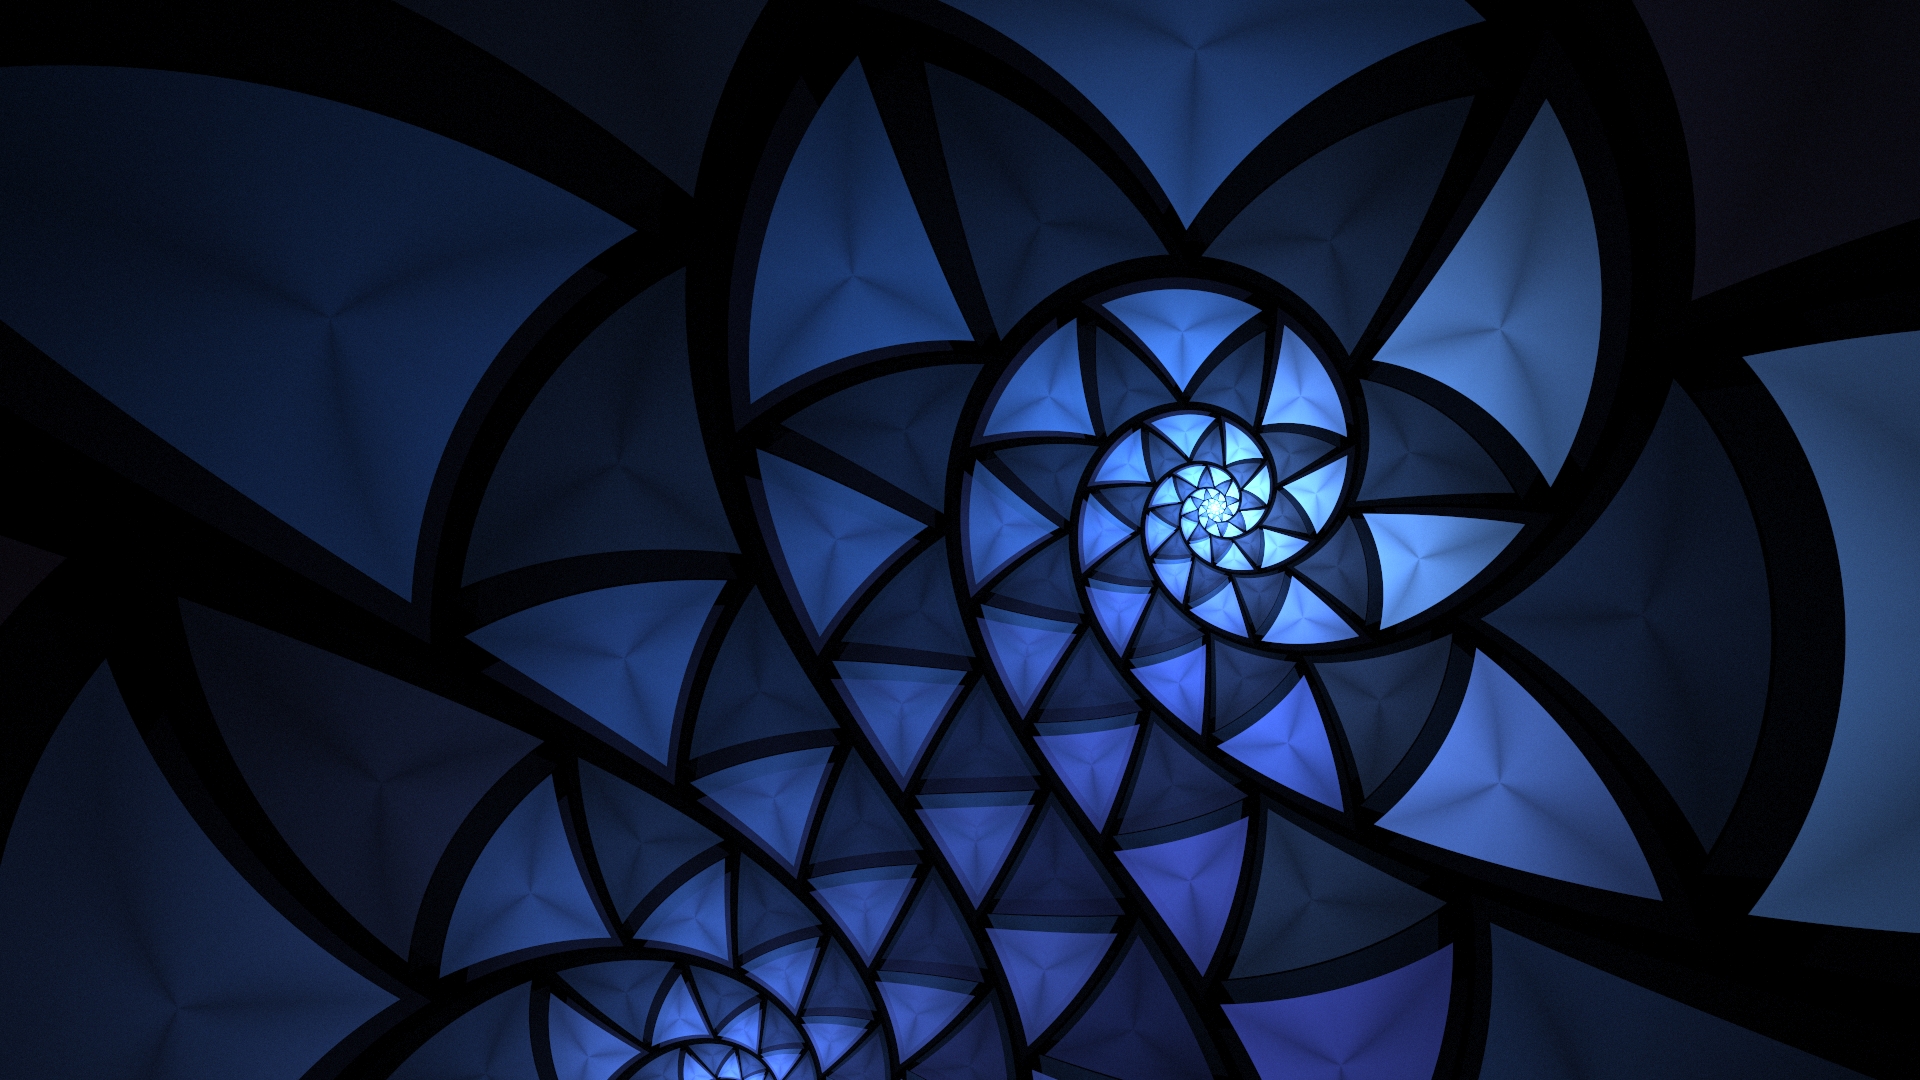 Abstract Spiral HD Wallpaper | Background Image